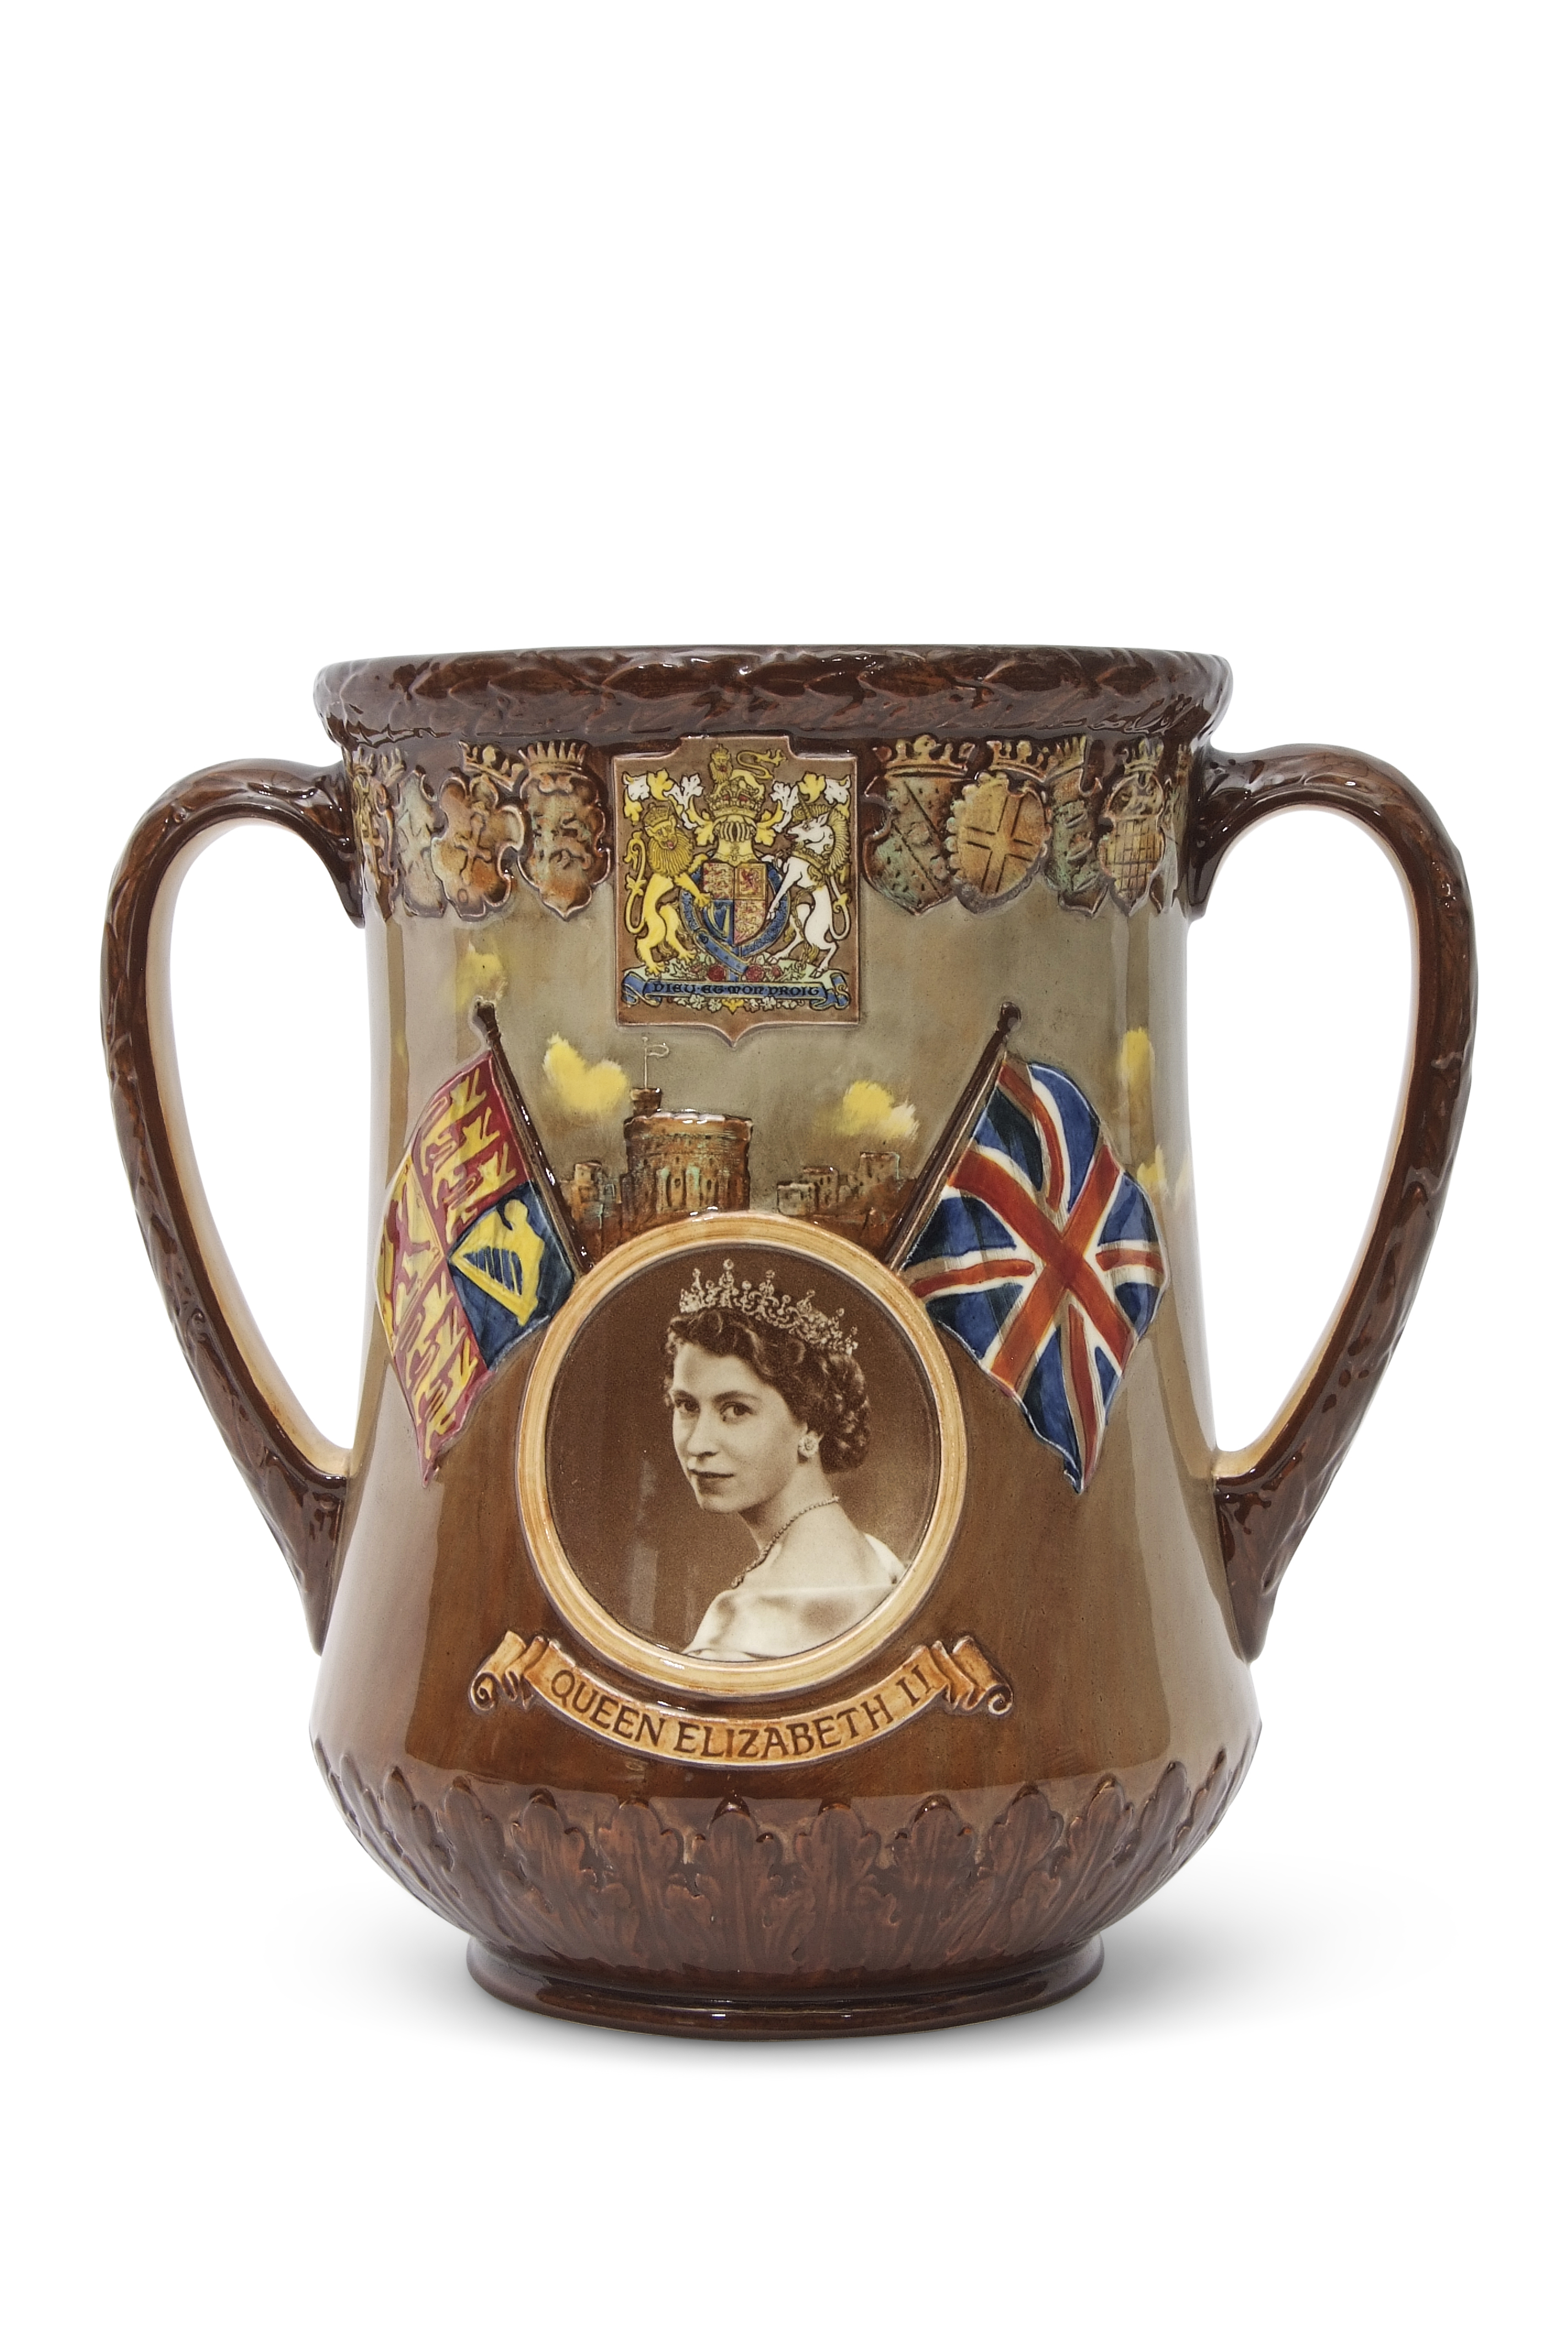 Royal Doulton limited edition loving cup to commemorate the Coronation of Queen Elizabeth II, the - Image 6 of 6